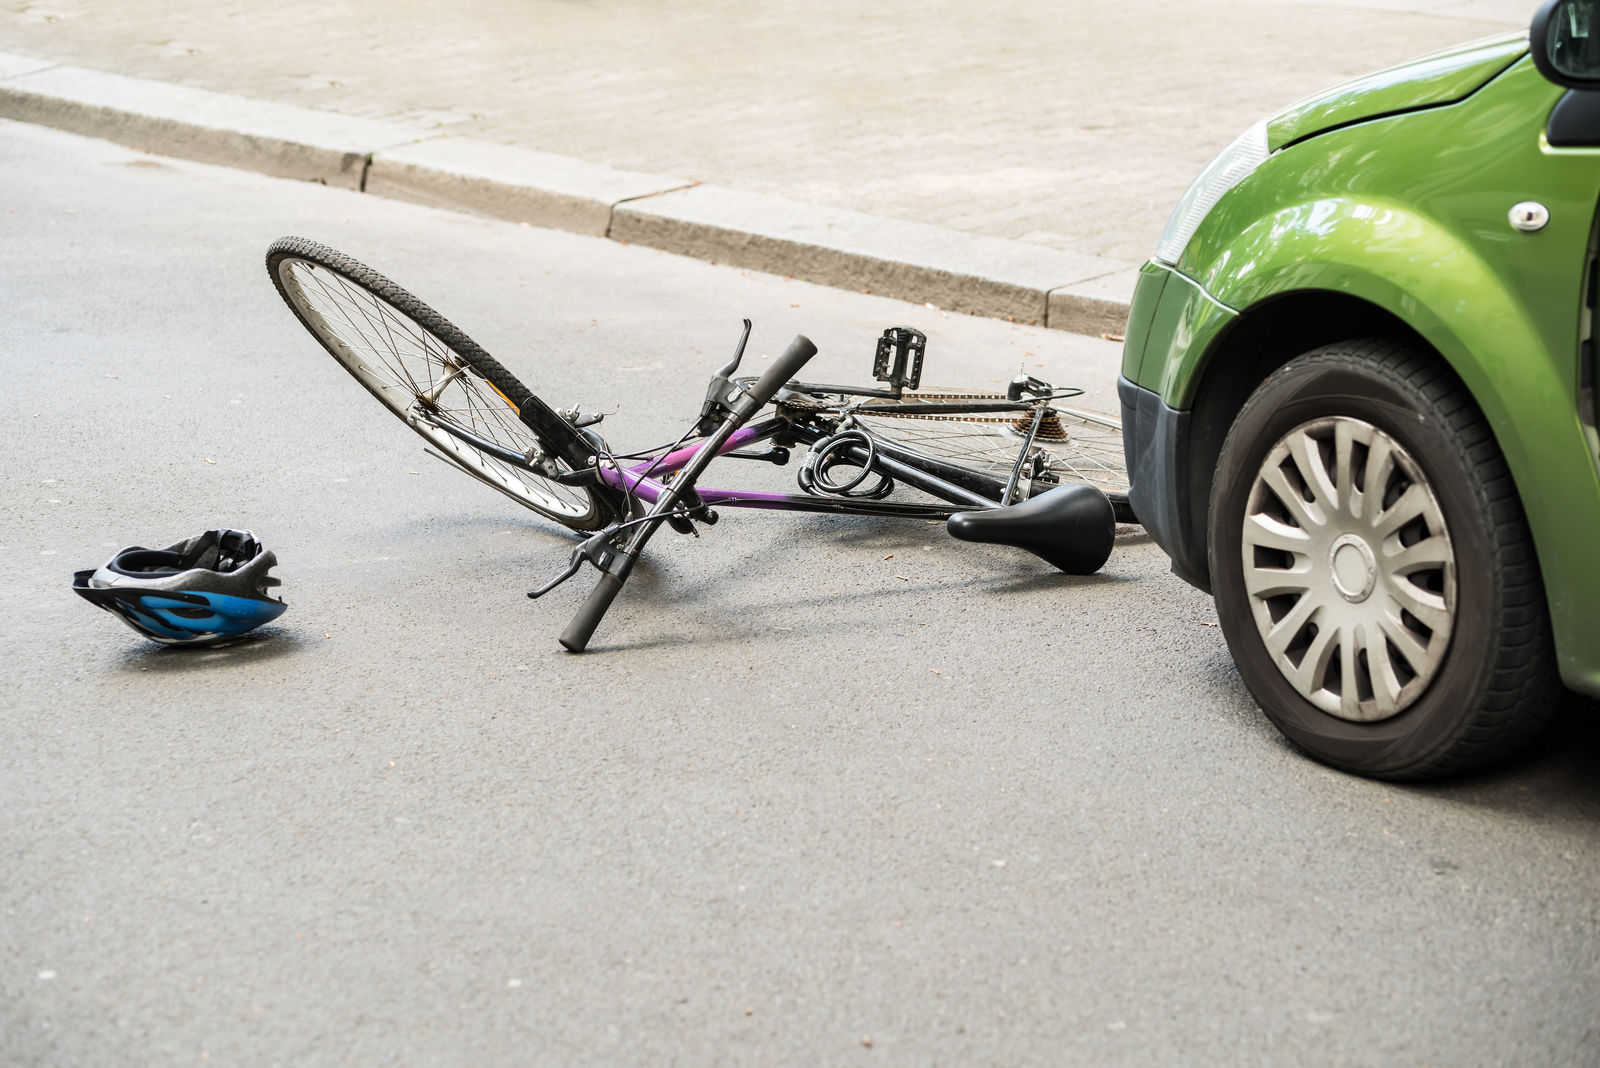 Does car insurance cover a bike accident?